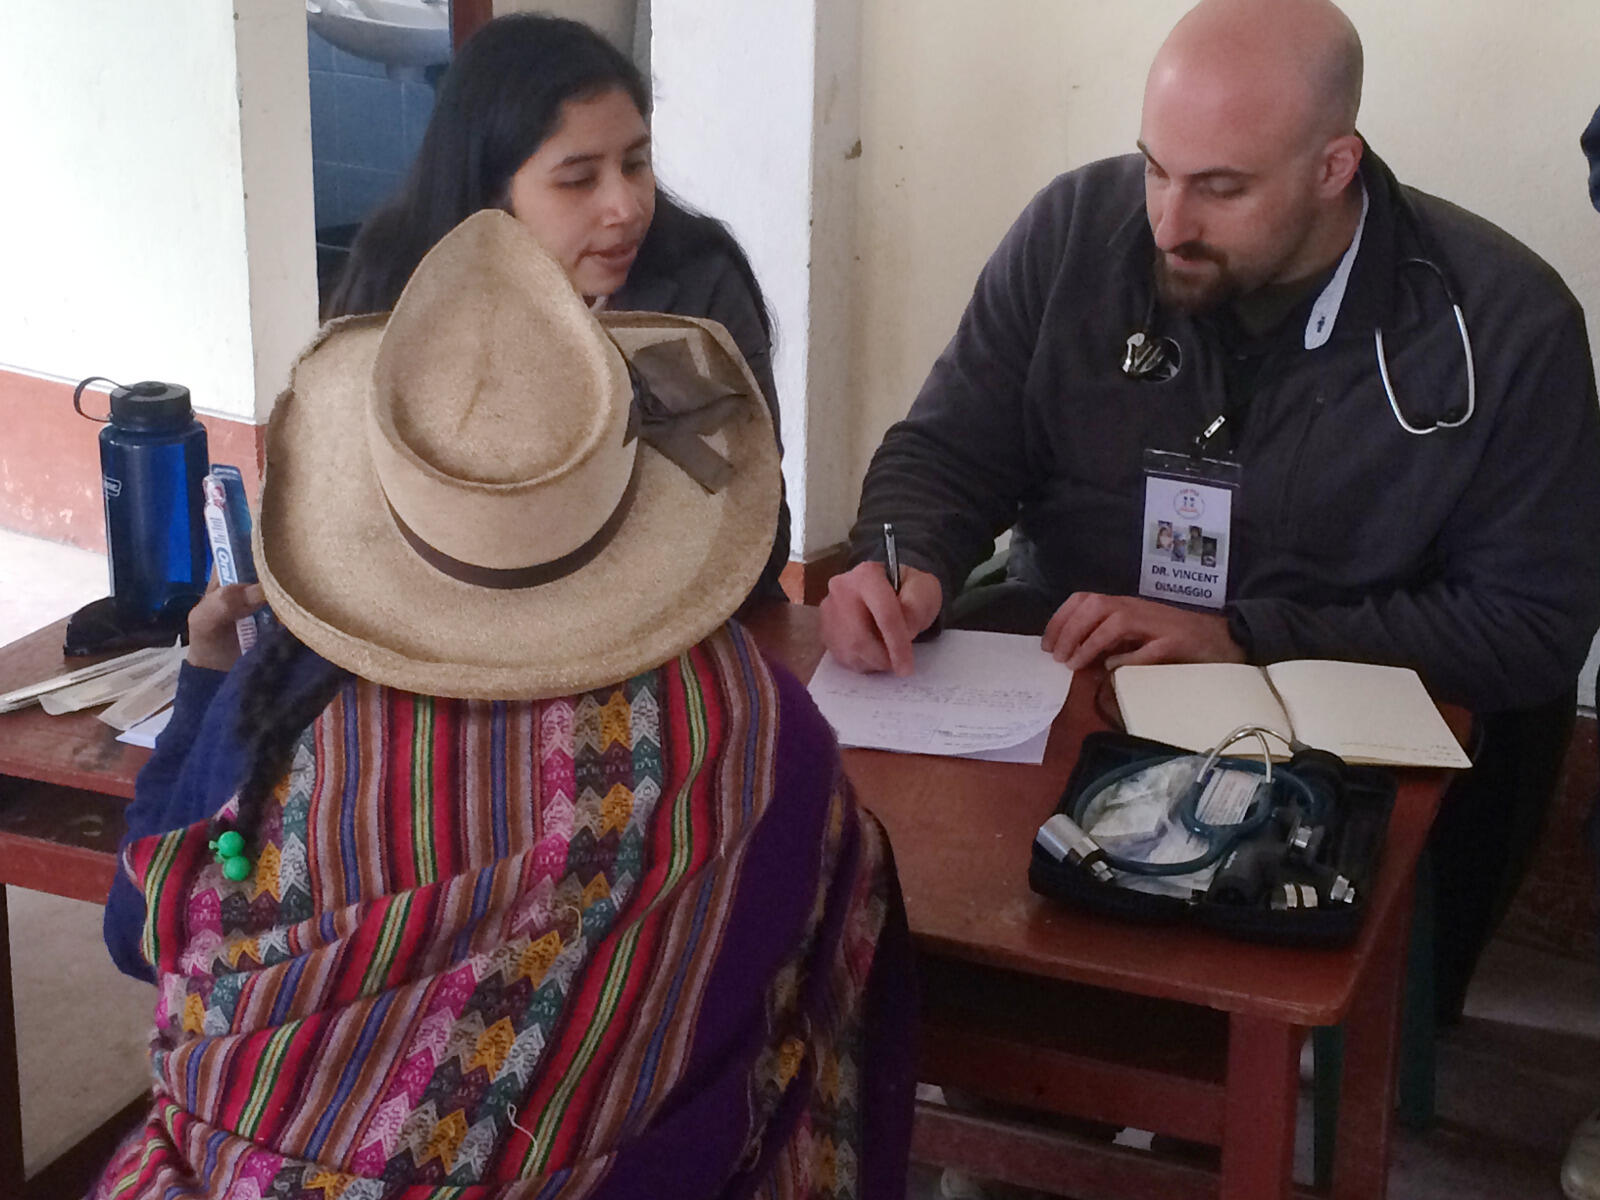 Karina Espinoza, left, a student in the VCU School of Medicine, assists with taking patient notes. Espinoza's mother lived in Pampas Grande until she moved to Lima at age six. Some of Espinoza's extended relatives are patients at the RGHA clinic and her grandfather was mayor of the district. 'I love going to Pampas [Grande] as I am able to serve my mother's hometown and extended family members,' Espinoza said. Pictured right: Vincent DiMaggio, M.D., clinical associate of pediatrics at the University of Chicago.
<br>Contributed photo by RGHA